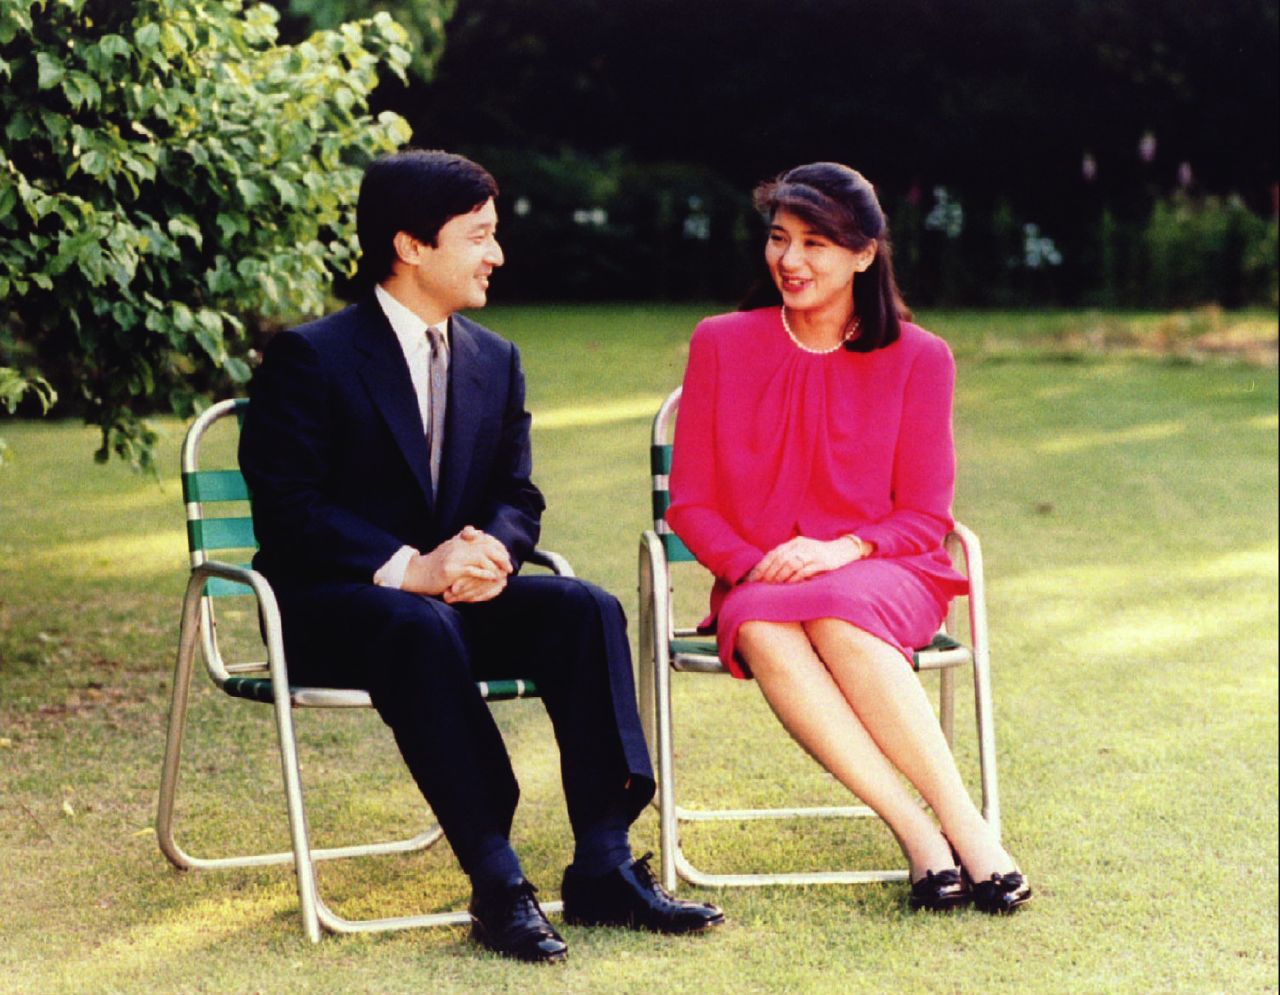 Naruhito chats with his fiancee, Masako Owada, in June 1993. Like his father, Naruhito married a commoner. Masako previously worked as a diplomat.